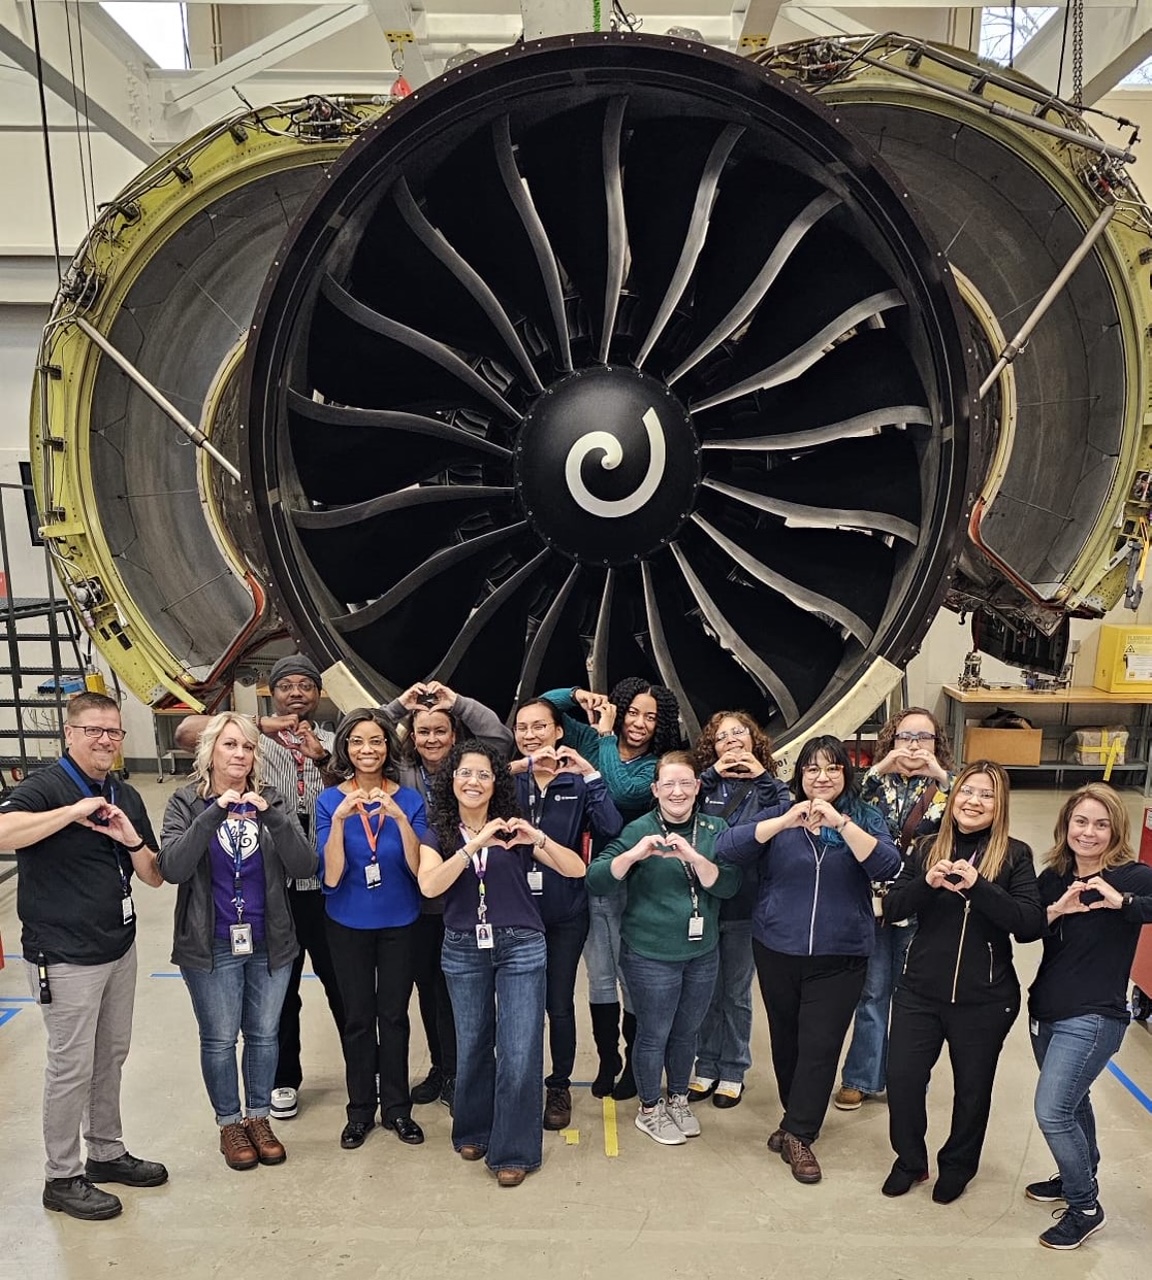 Moo Young with other participants at a hands-on engine class for International Women's Day.